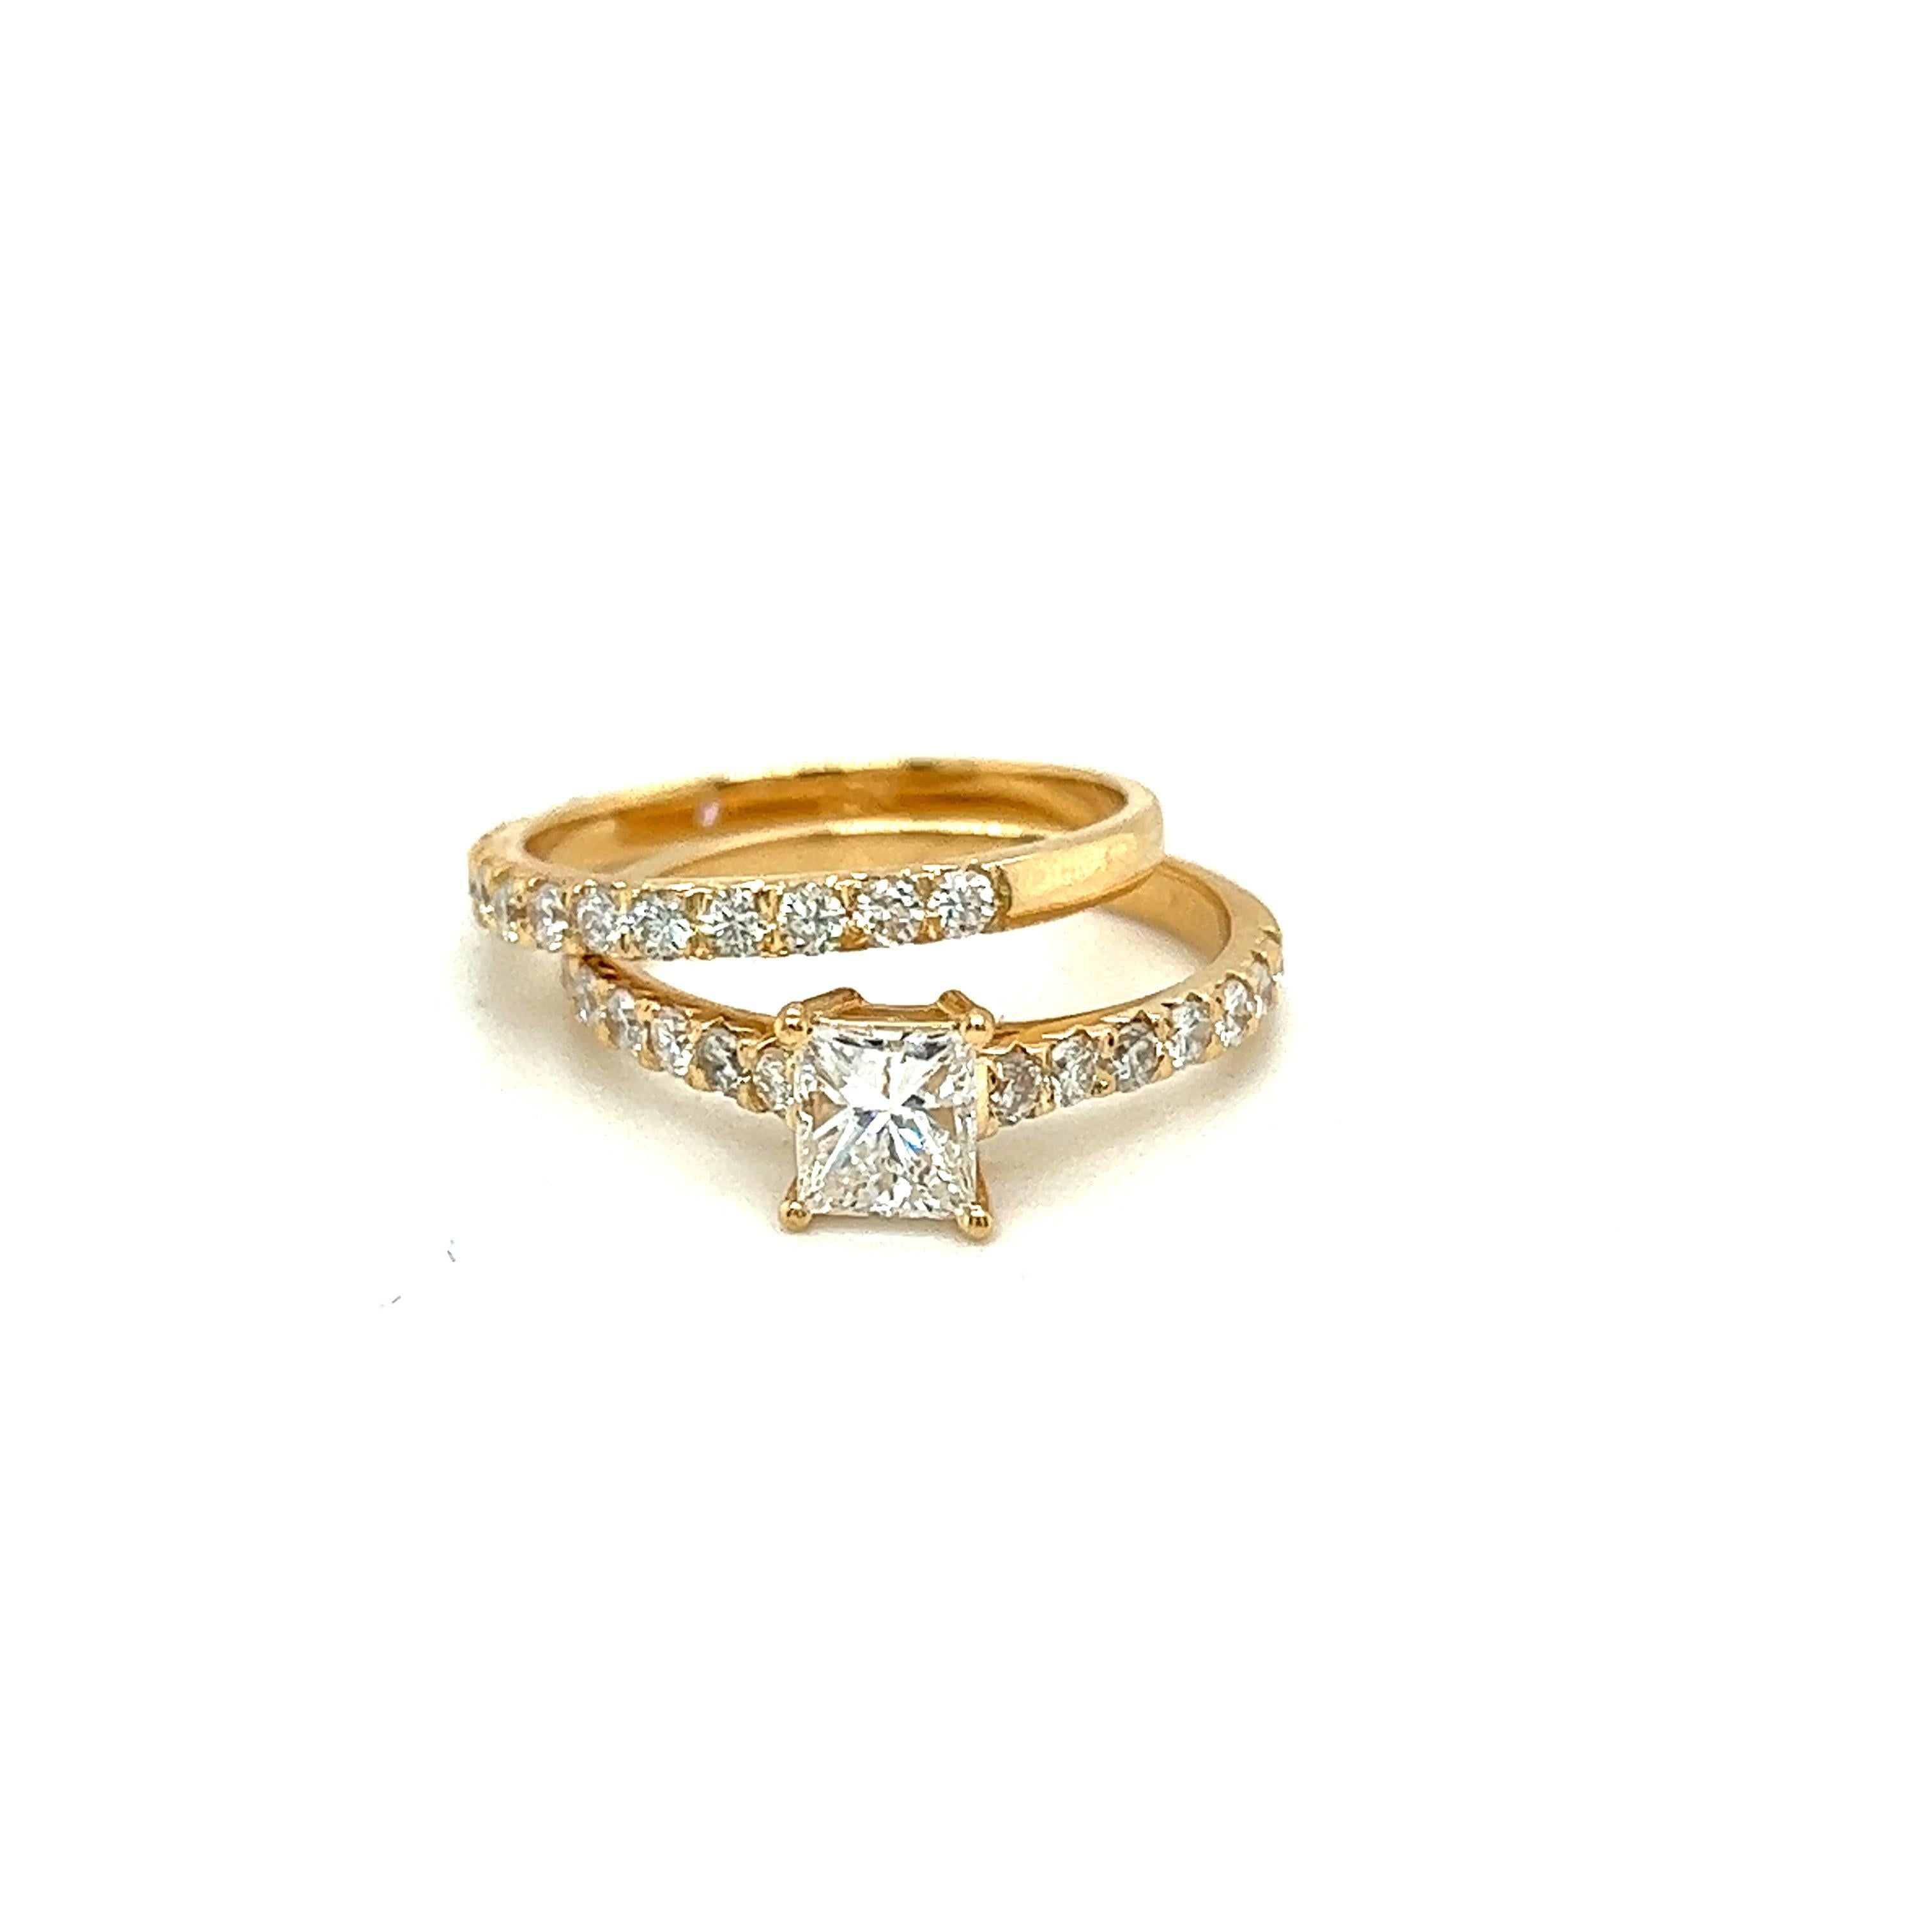 Engagement Ring AND Wedding Band
18k yellow gold engagement ring and wedding band set
Princess-cut 0.71ct SI-VS Natural earth mined diamonds
Side Diamond & DIA in band 0.86 ct
2mm shank

